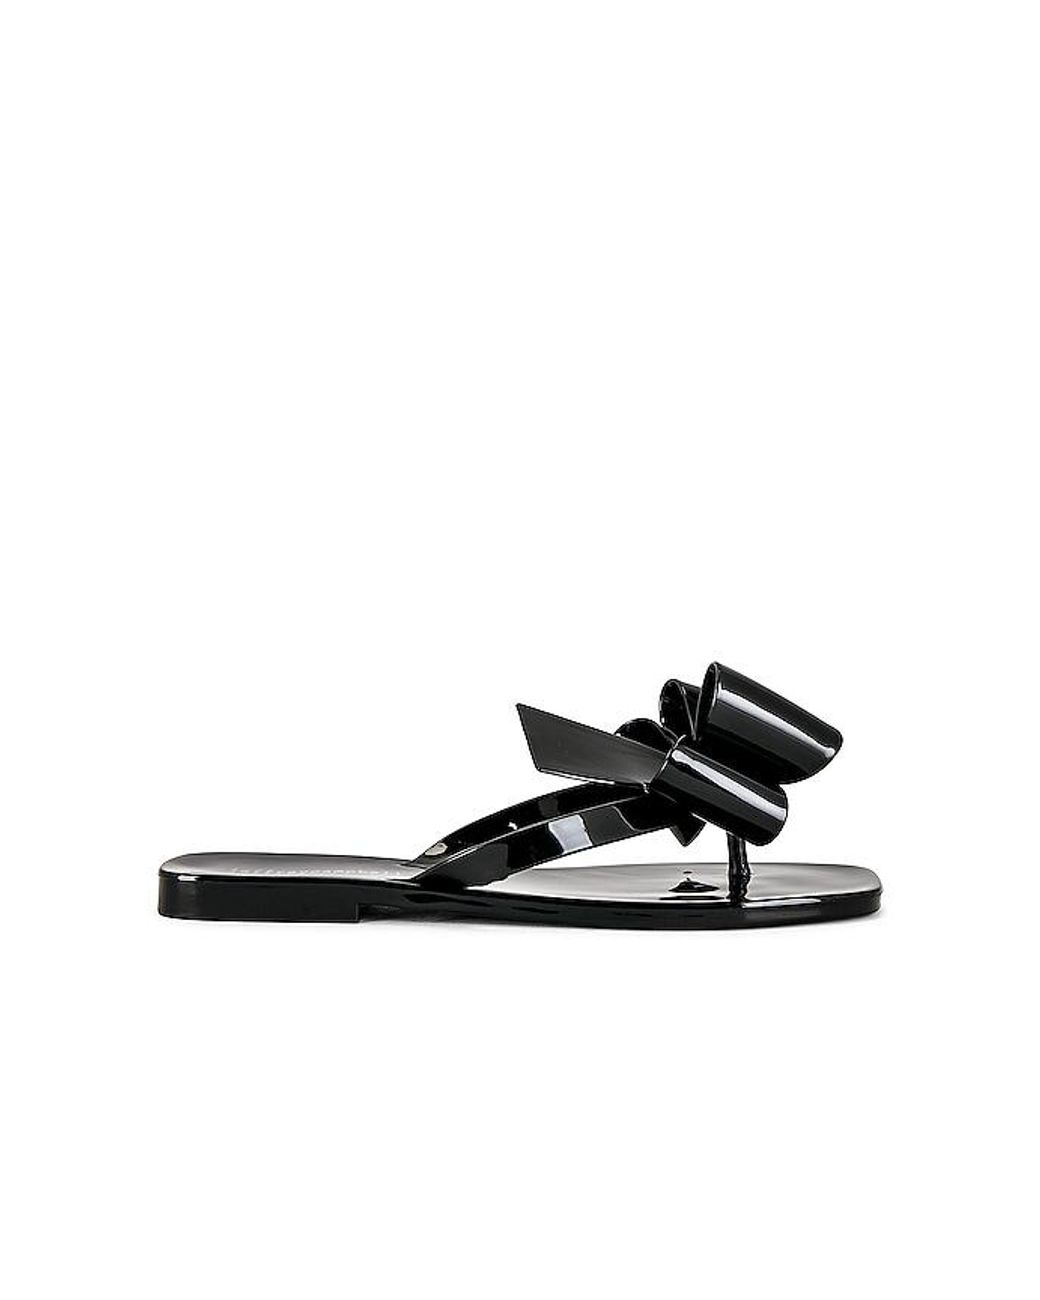 Jeffrey Campbell Sugary Sandal in Black | Lyst